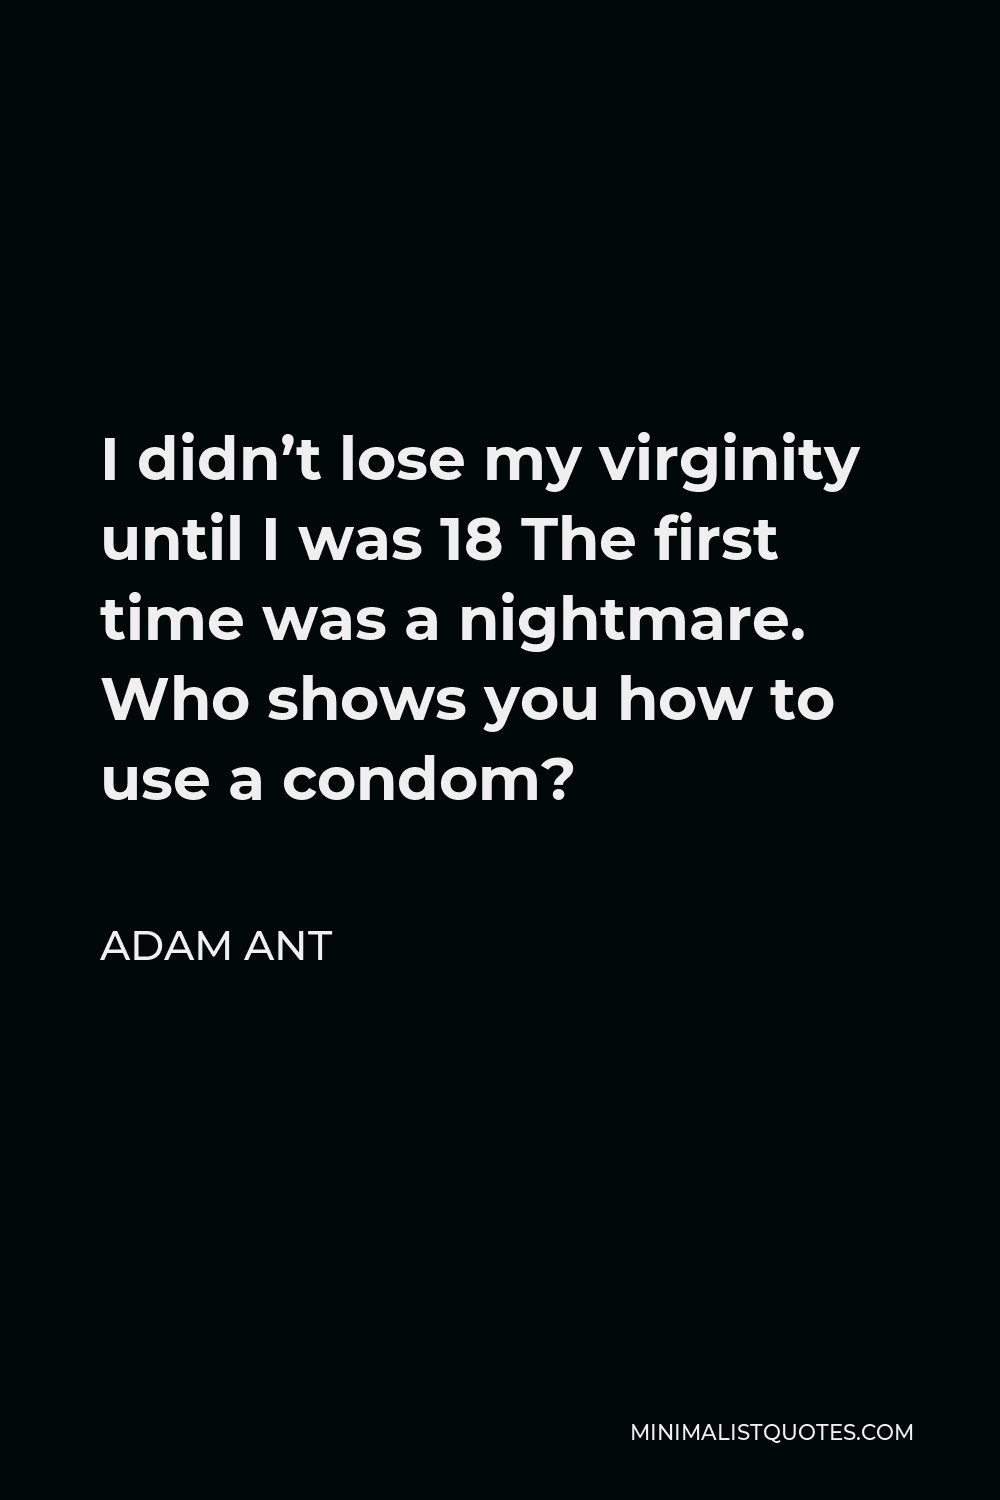 Adam Ant Quote - I didn’t lose my virginity until I was 18 The first time was a nightmare. Who shows you how to use a condom?